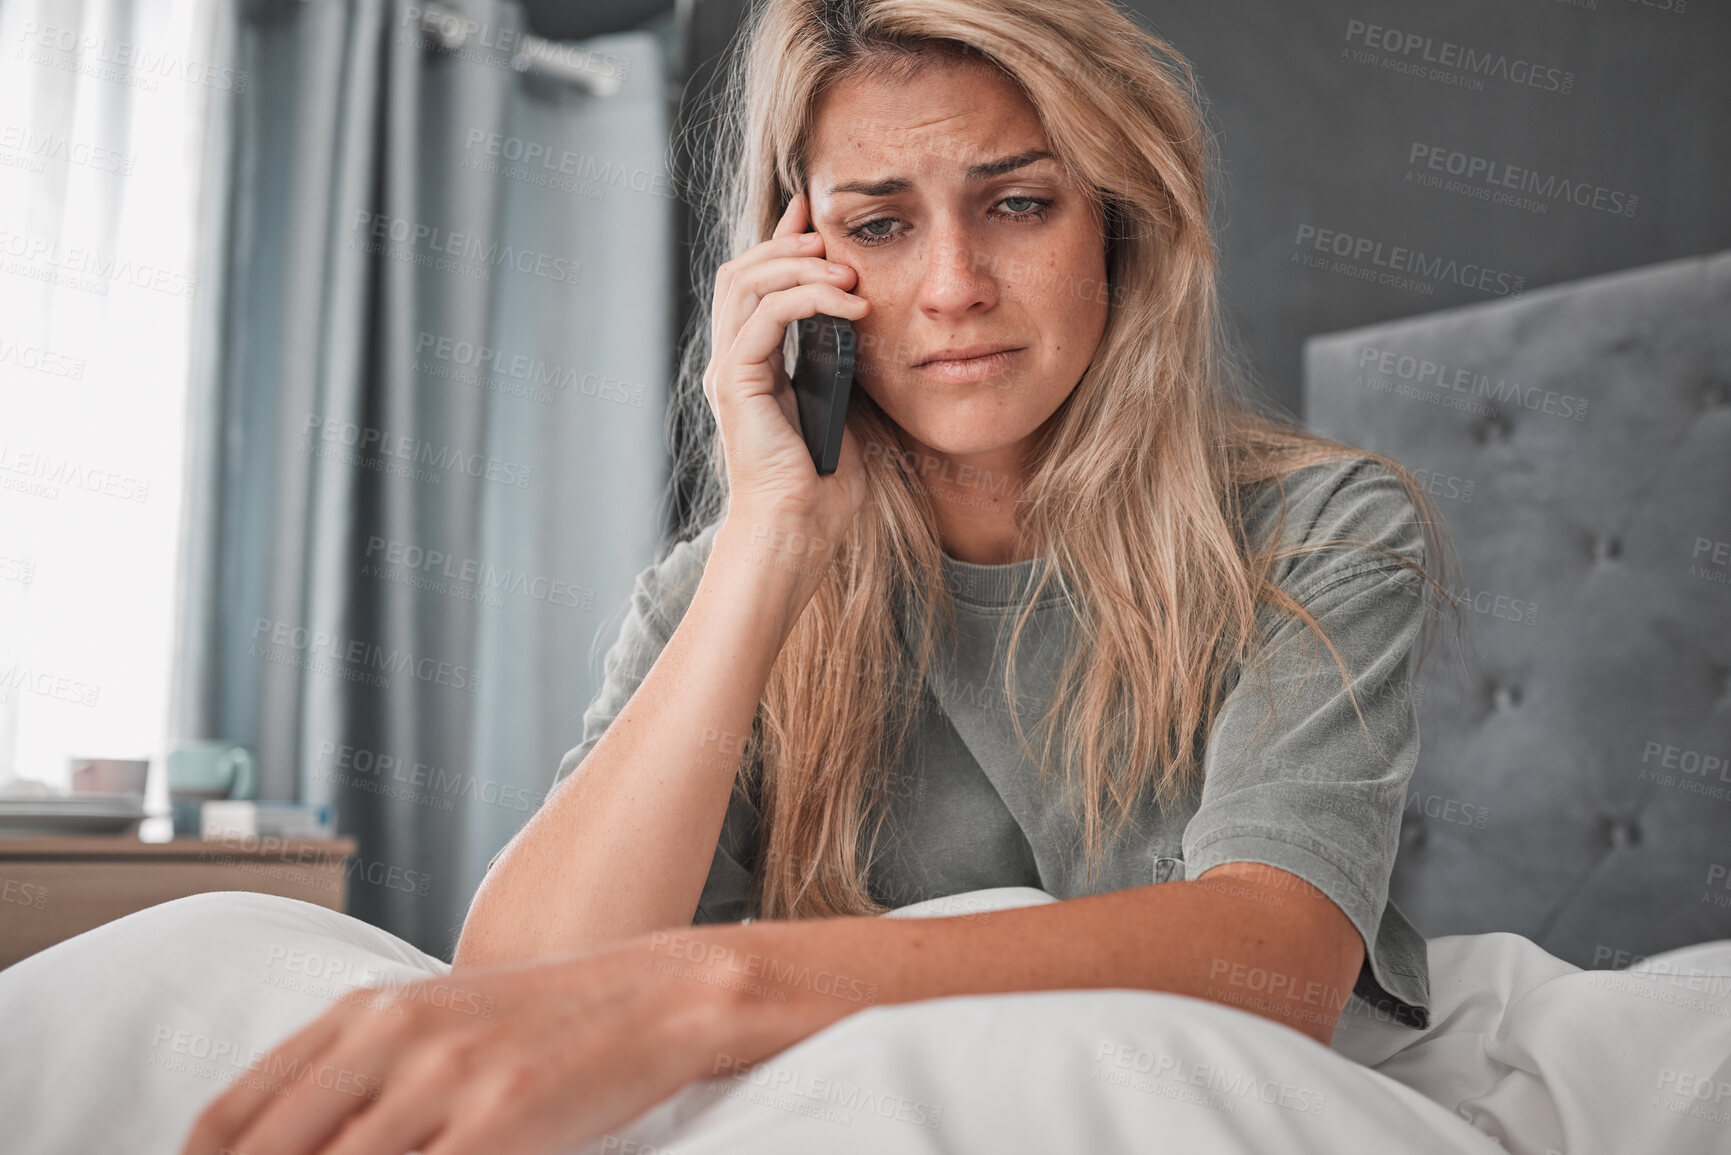 Buy stock photo Sad, stress and woman with depression in a phone call conversation in her bedroom worried about a break up. Mental health, anxiety and depressed girl disappointed after listening to bad news at home